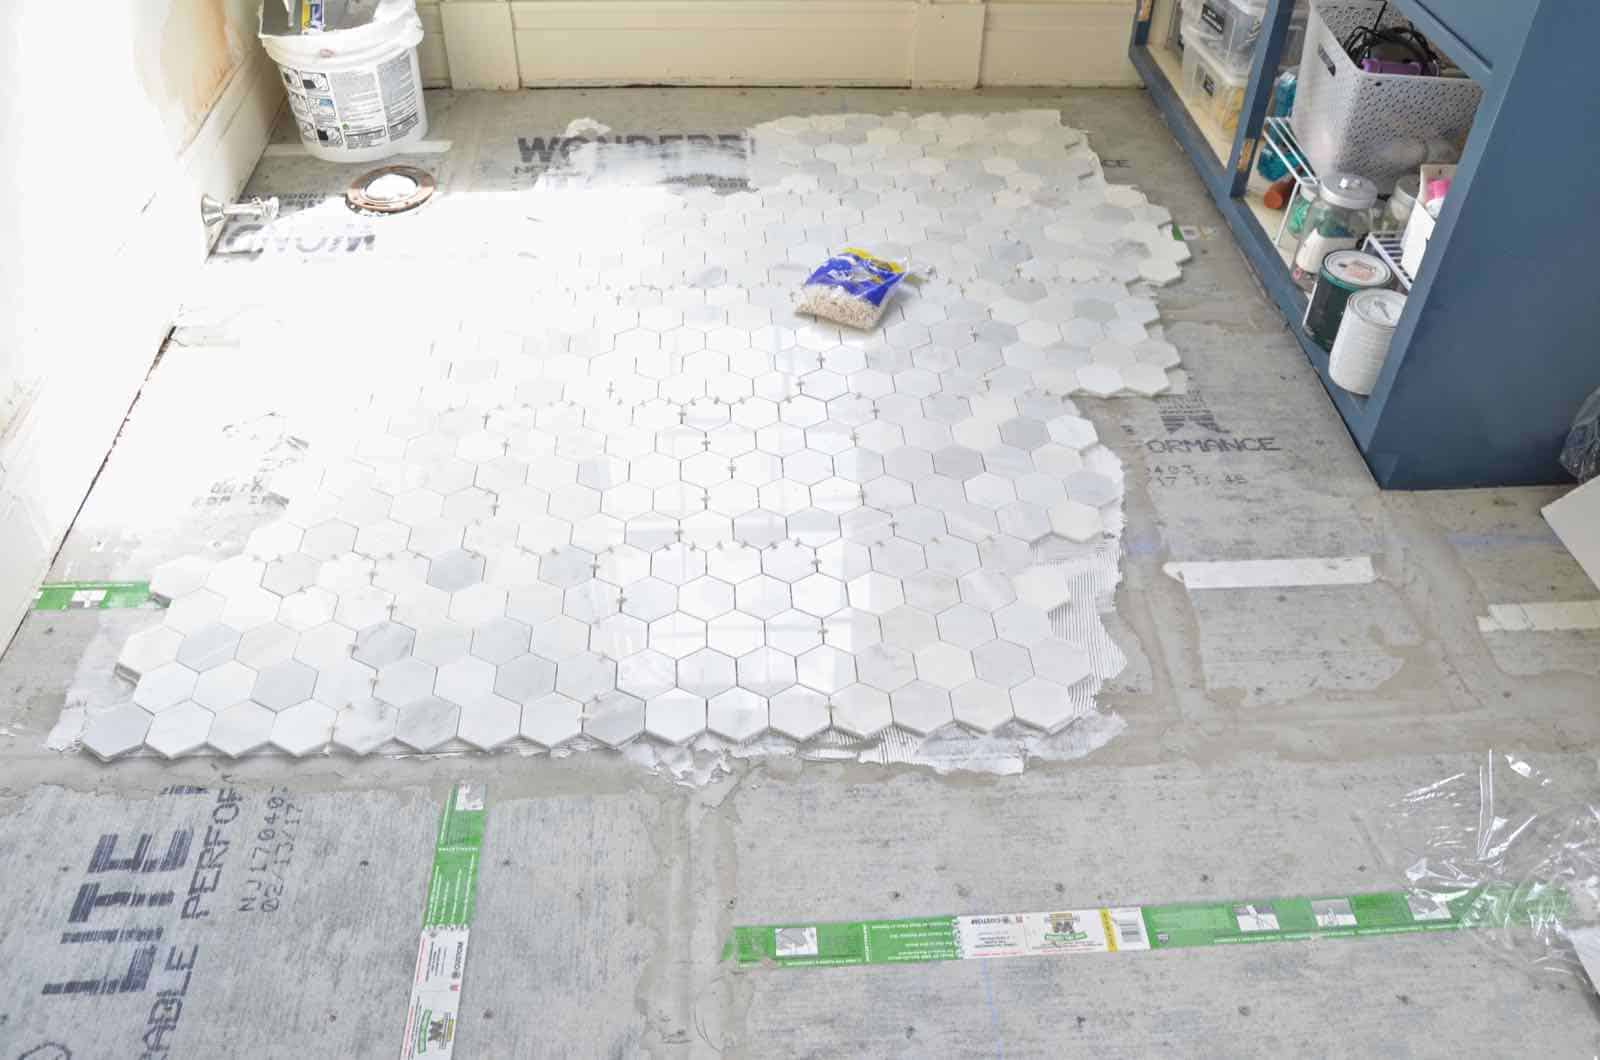 How to tile a bathroom floor... step by step guide!